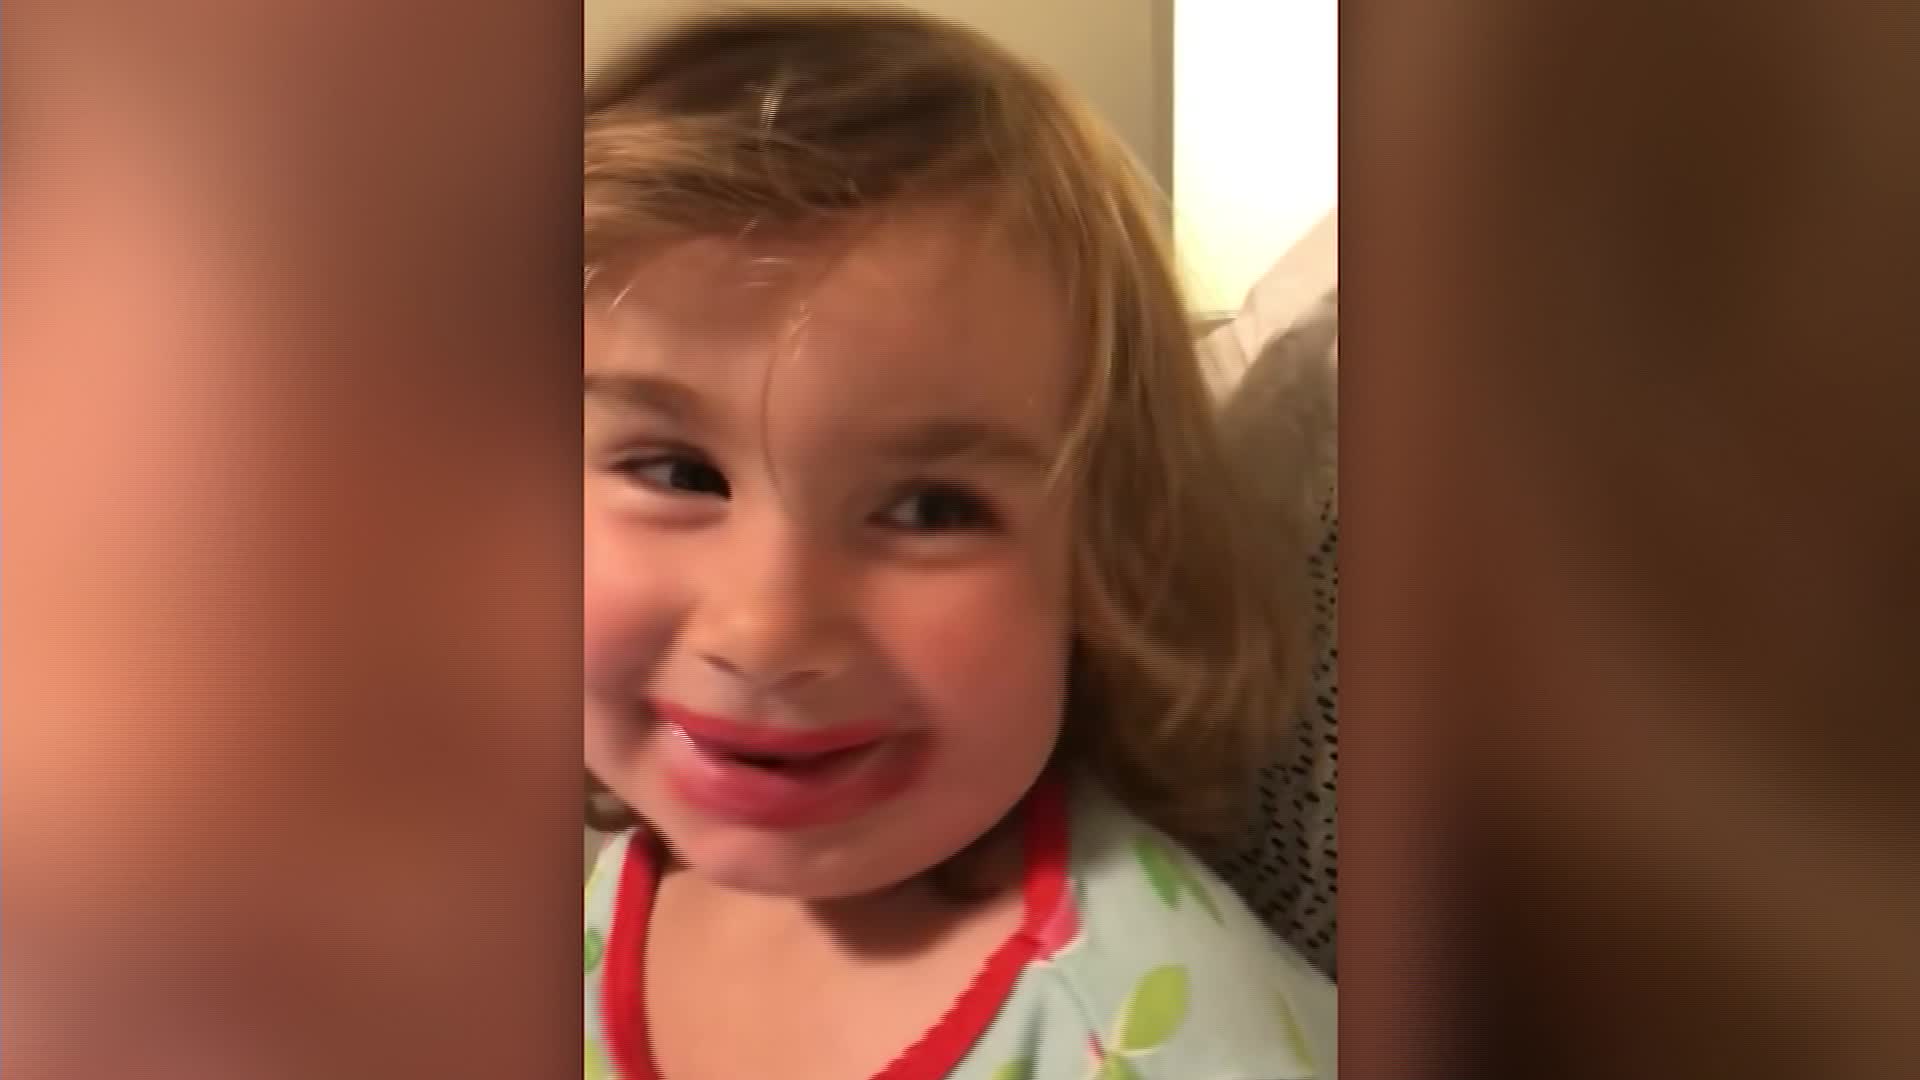 Father Sleeping With Enoseint Dother Hd Porn - Little girl tells dad she put on 'yip ick' in viral video | CNN